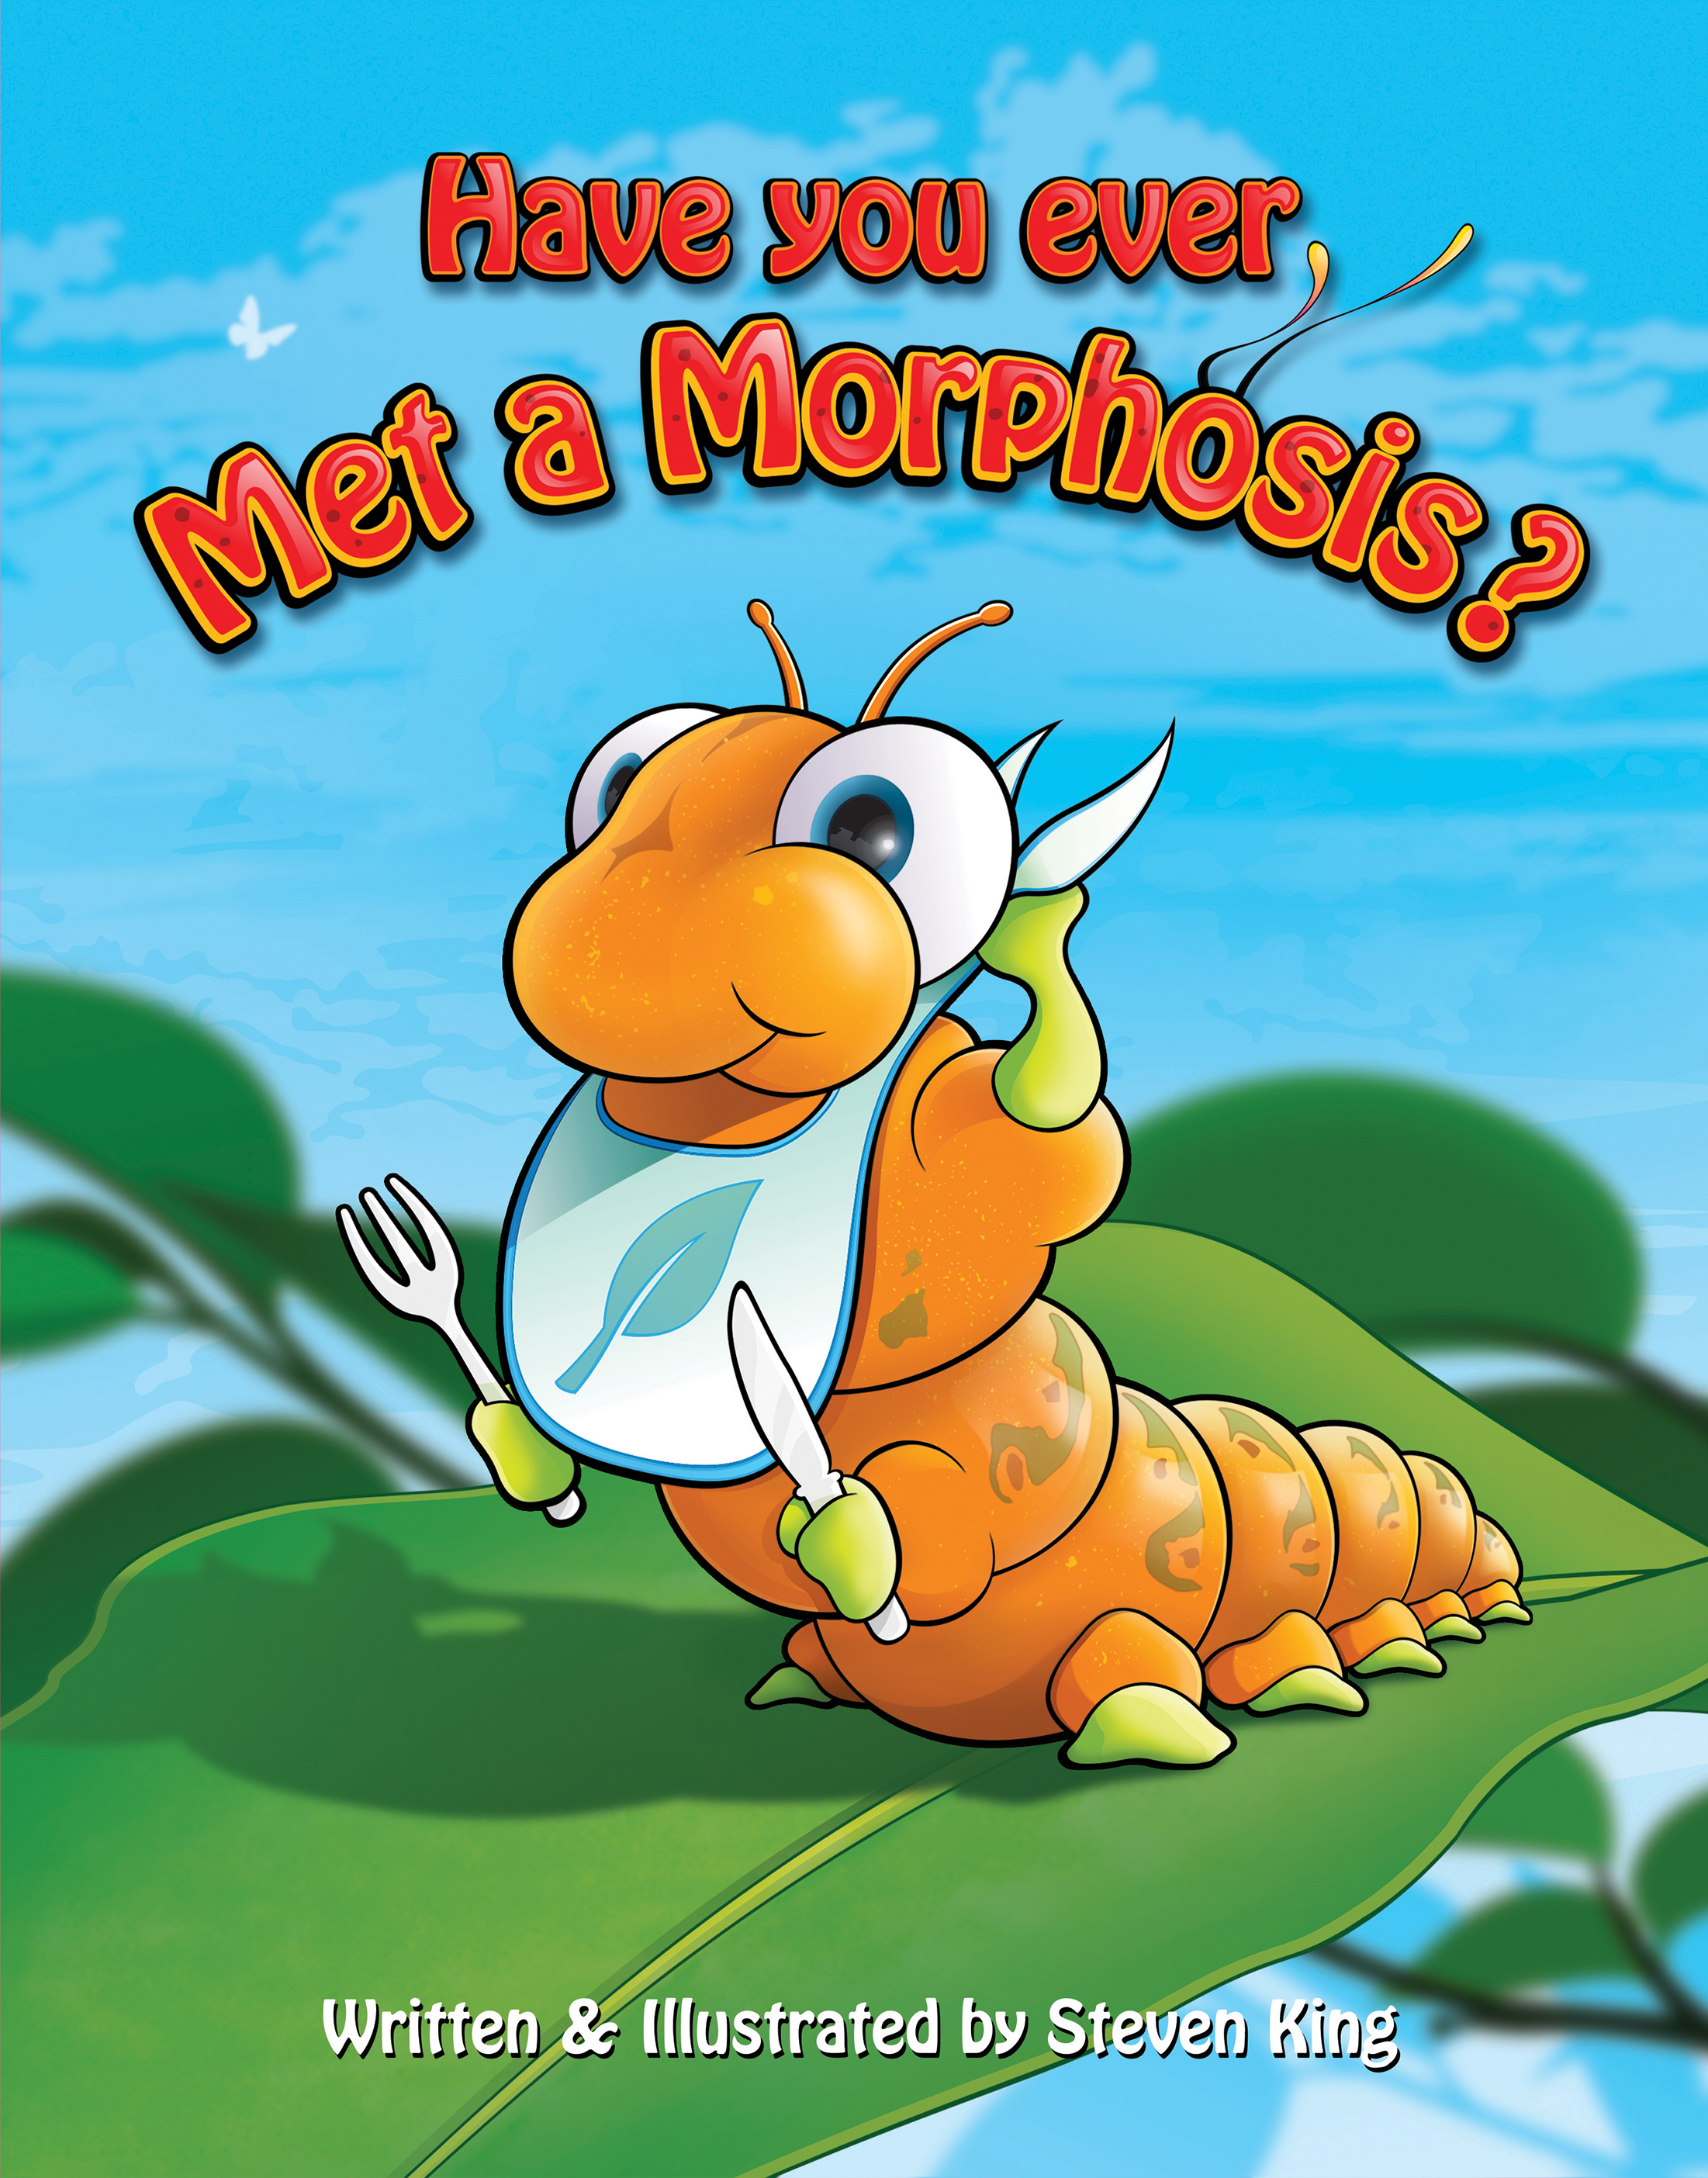 Have You Ever Met a Morphosis book cover